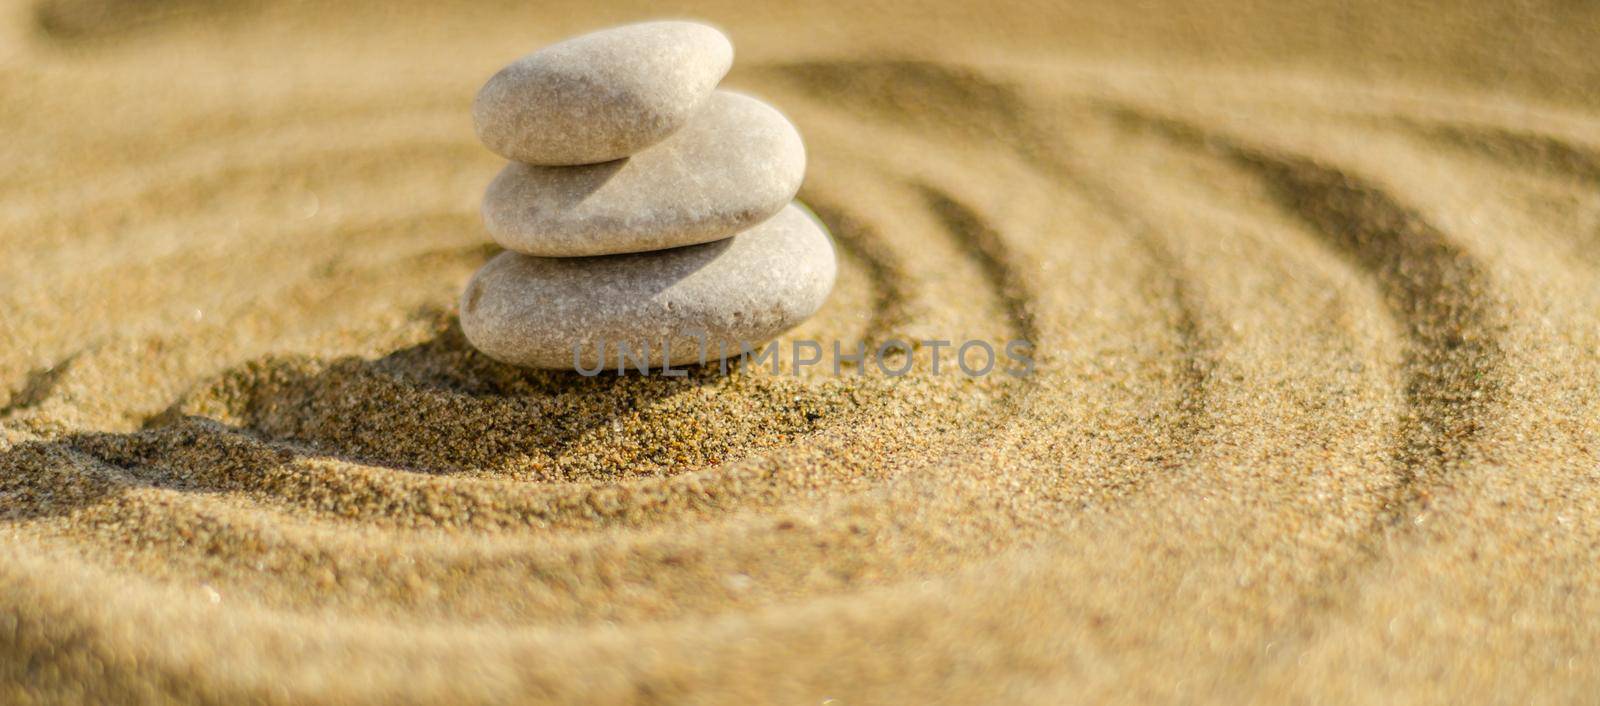 zen meditation stone in sand, concept for purity harmony and spirituality, spa wellness and yoga background by Q77photo